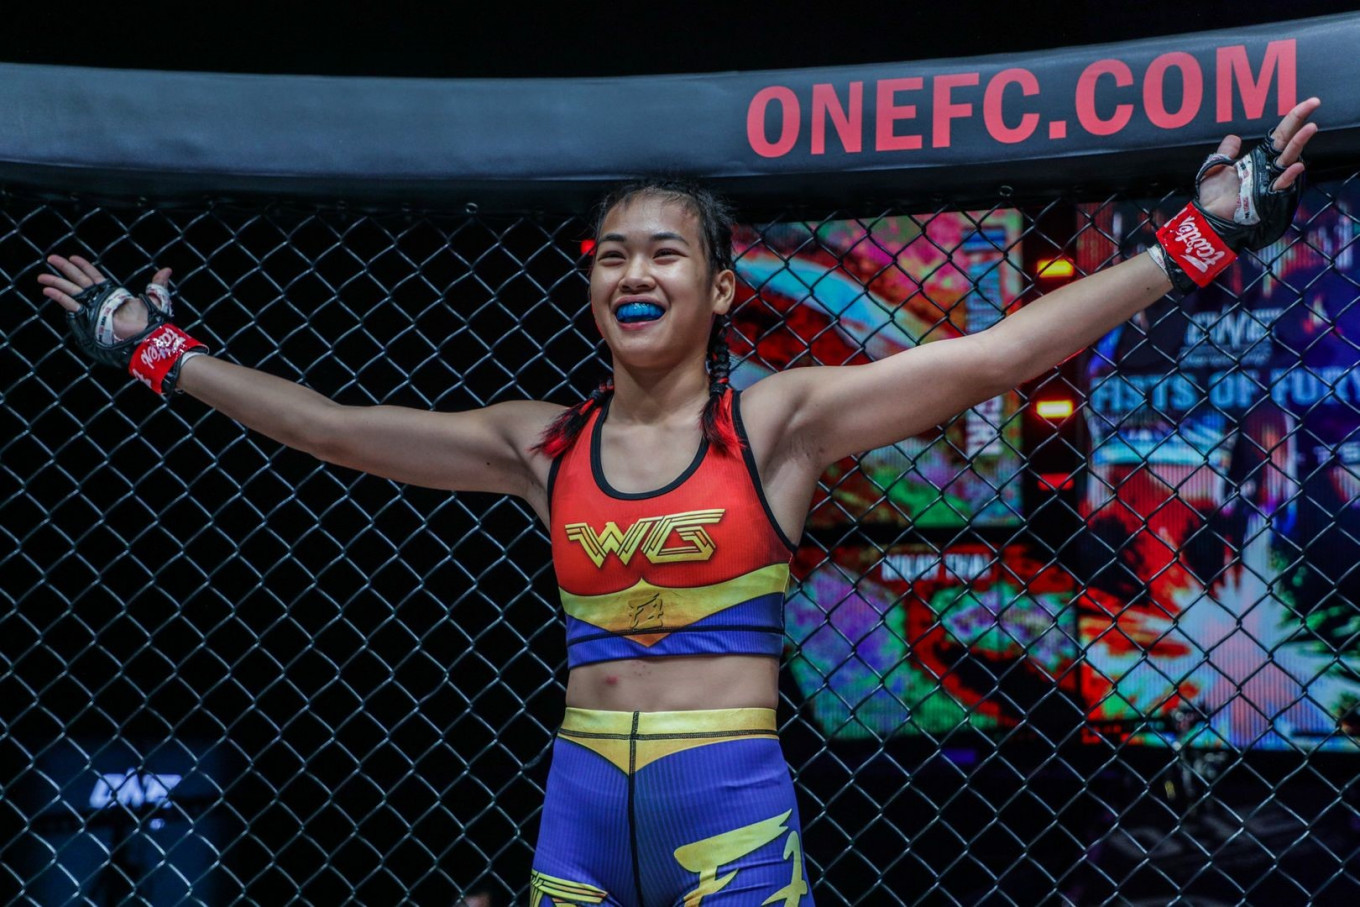 Wondergirl To Make Mma Debut After Years Of Muay Thai Domination